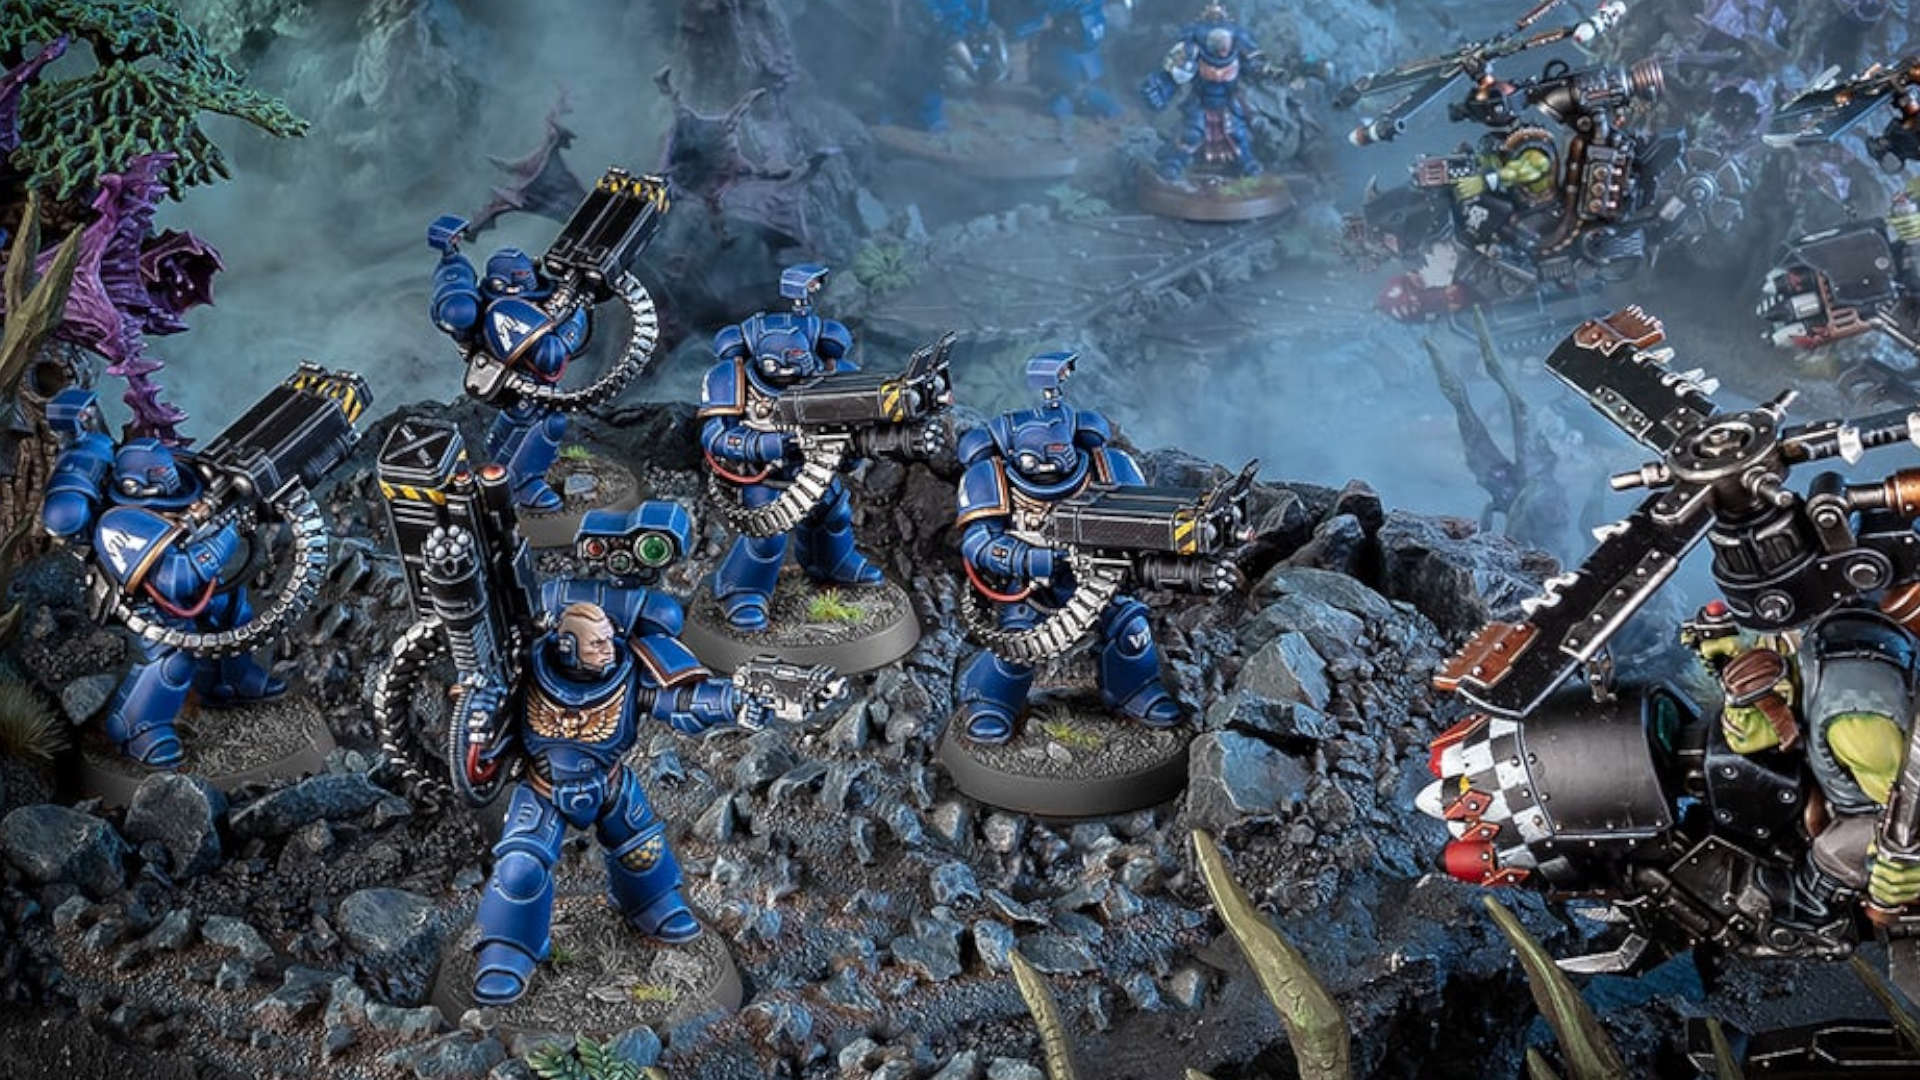 Warhammer 40k tournament organiser explains problems in 10th edition for competitive play - Desolation Squad Space Marines, power armored warriors with man portable missile launchers